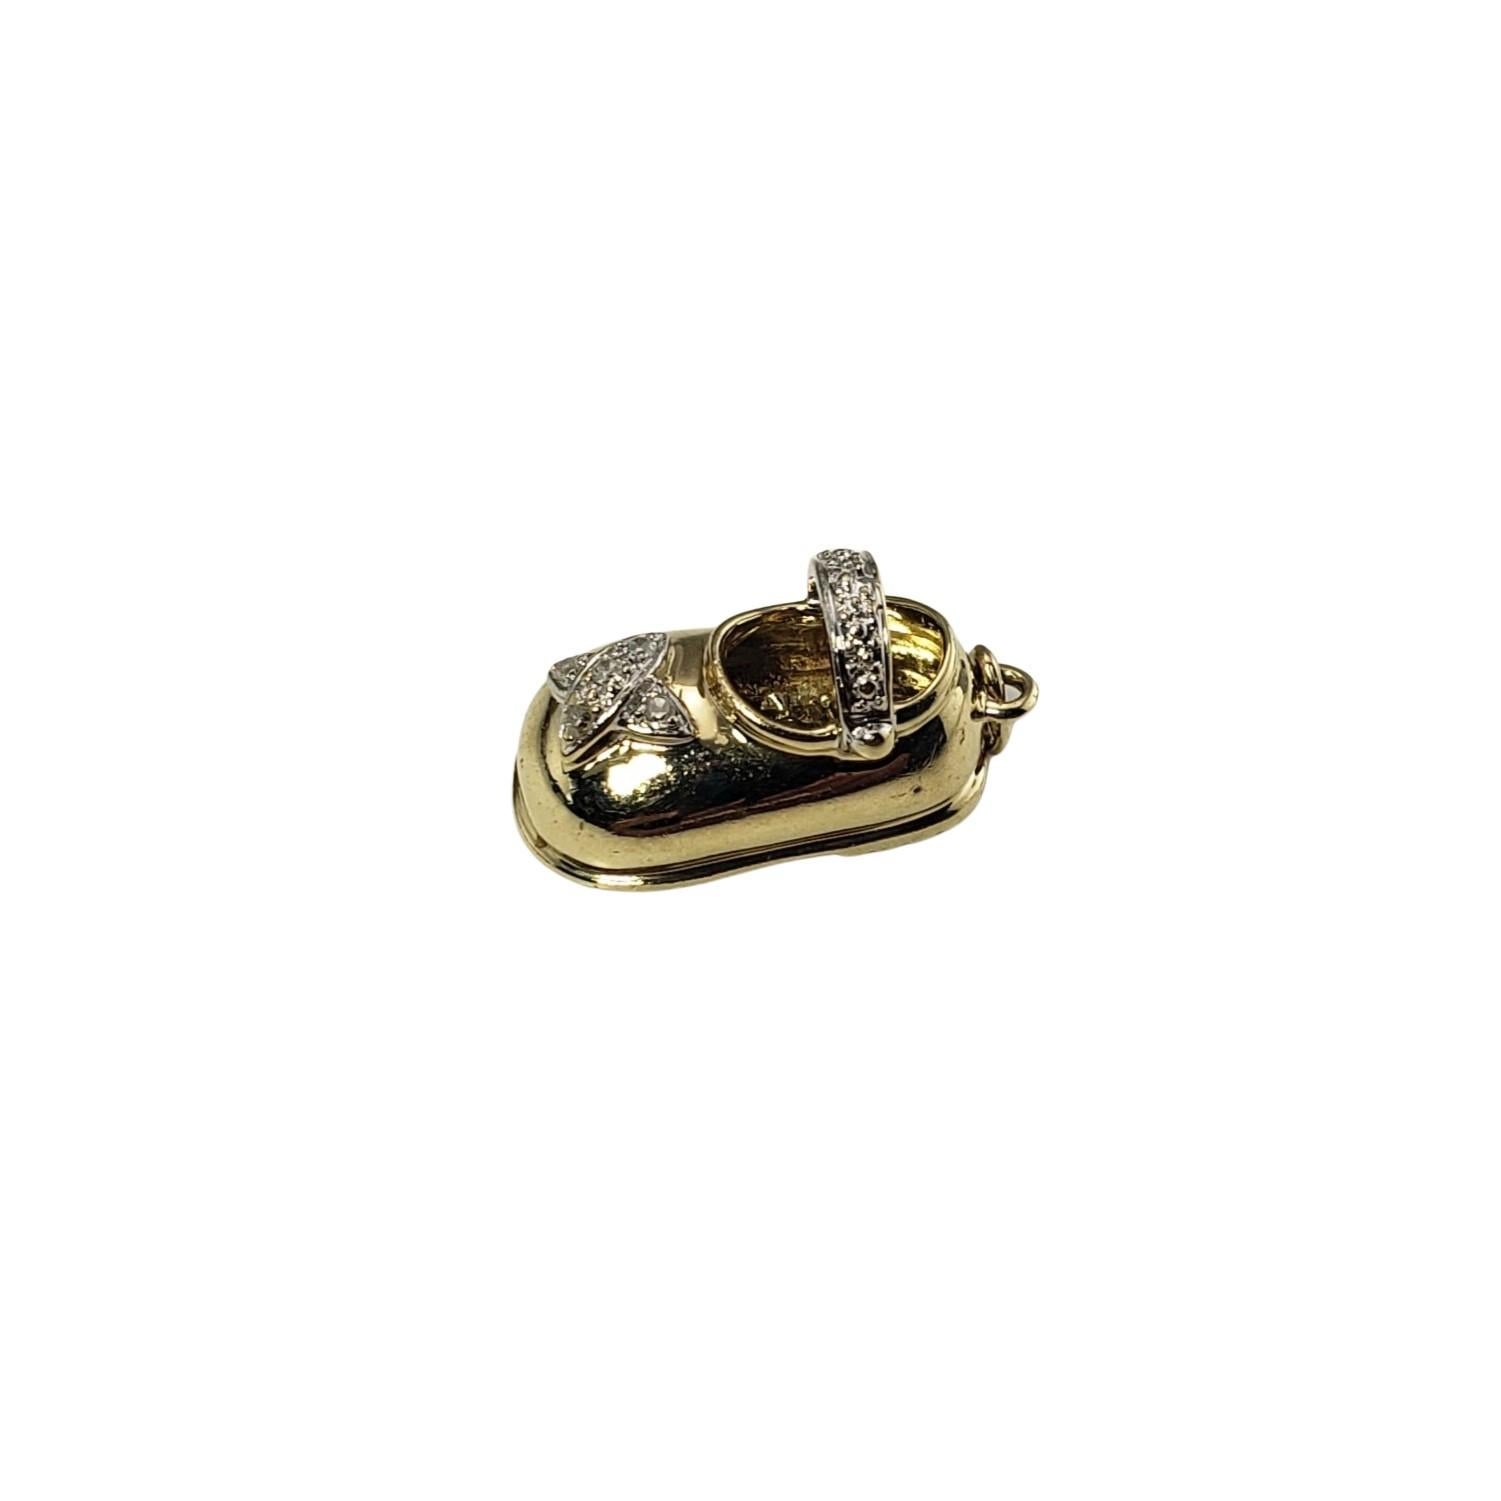 Brilliant Cut 14 Karat Yellow Gold and Diamond Baby Shoe Charm #12766 For Sale